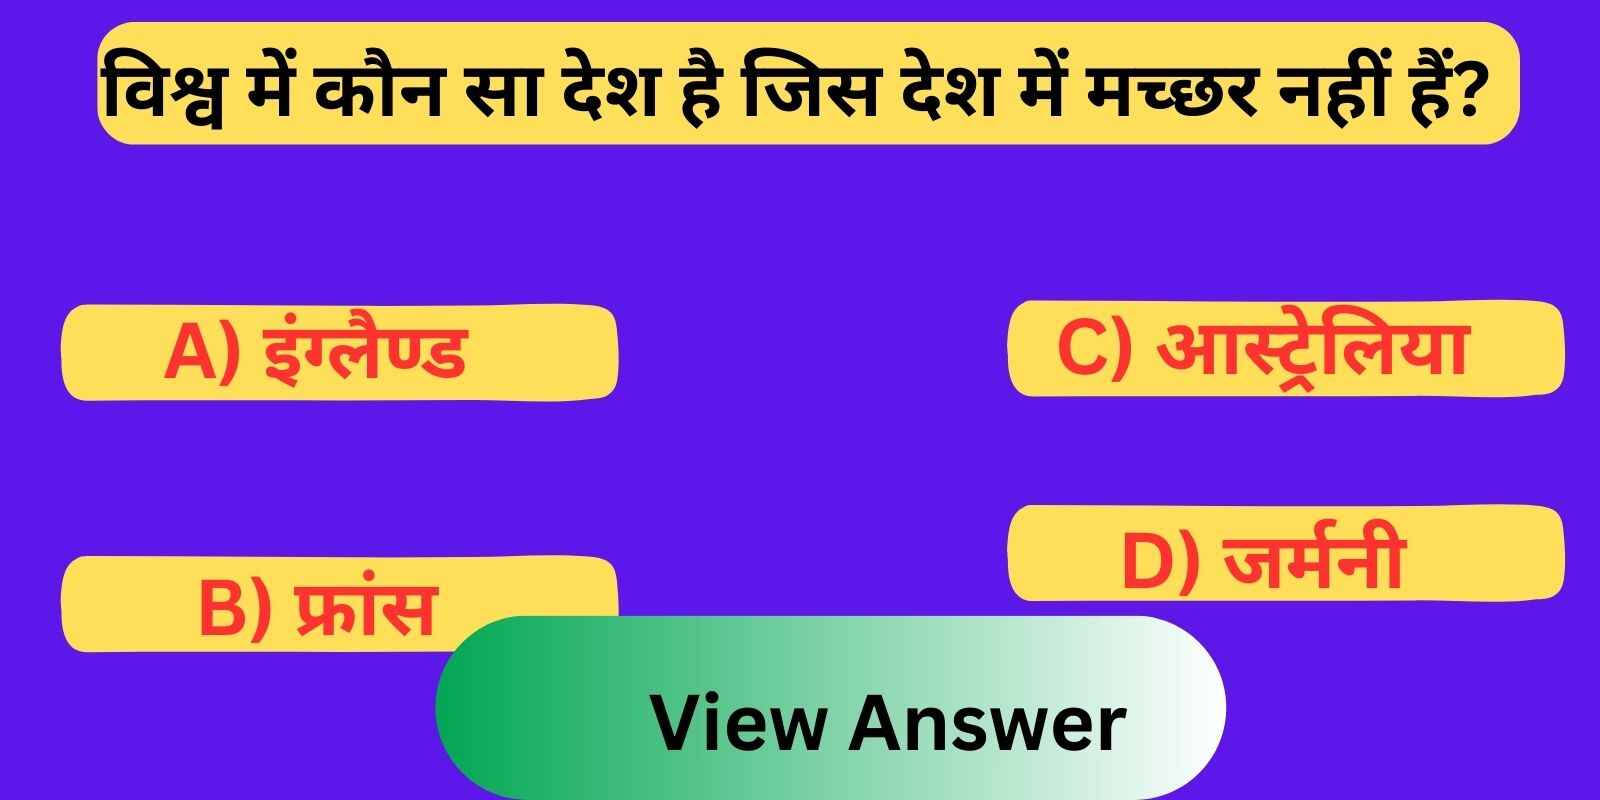 Animal gk questions in hindi